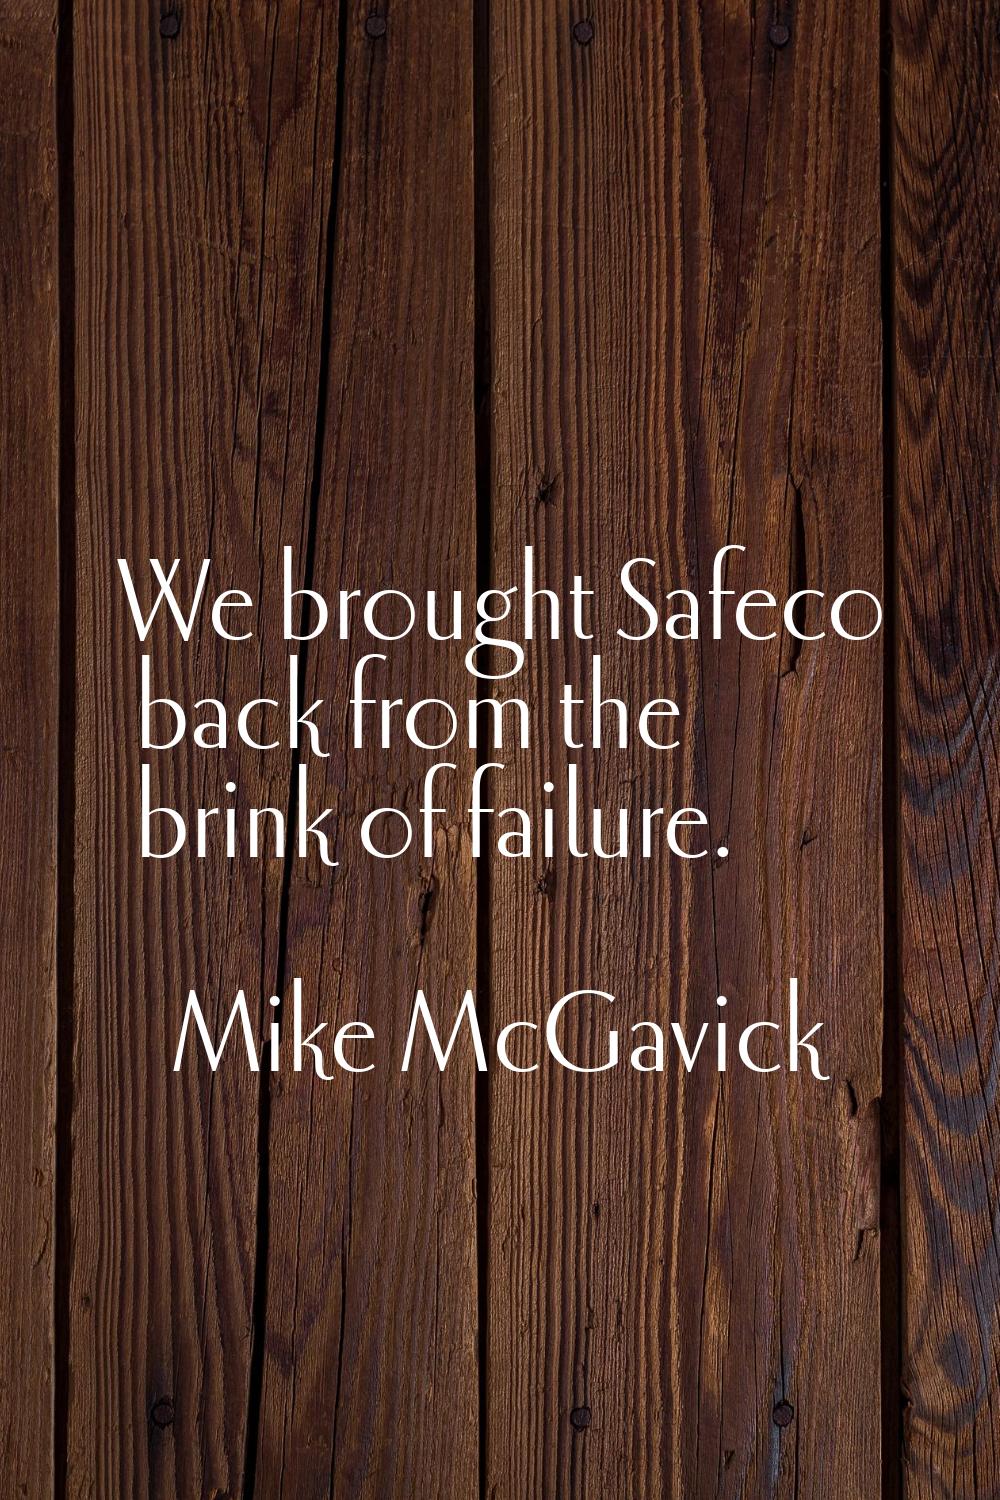 We brought Safeco back from the brink of failure.